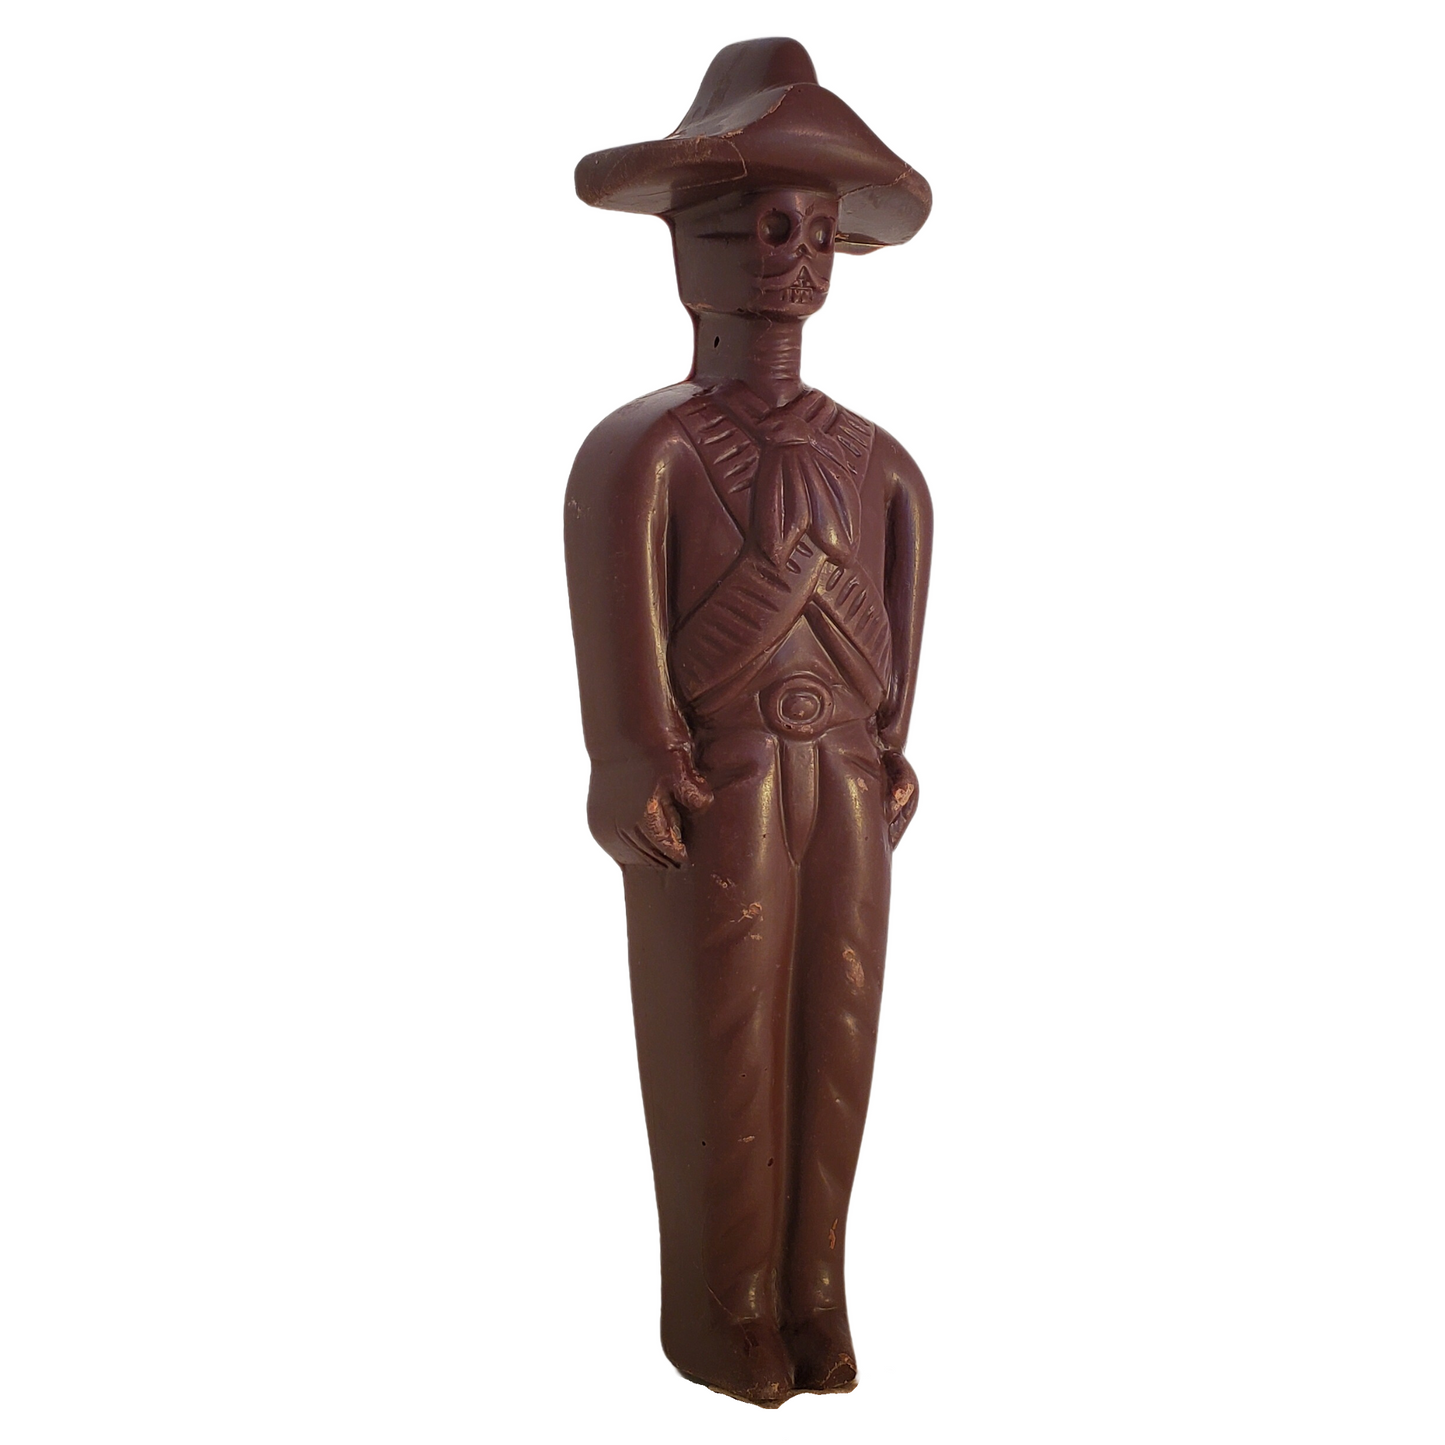 Dark chocolate figure of a Zapatista rebel with a skull face and wearing a sombrero.